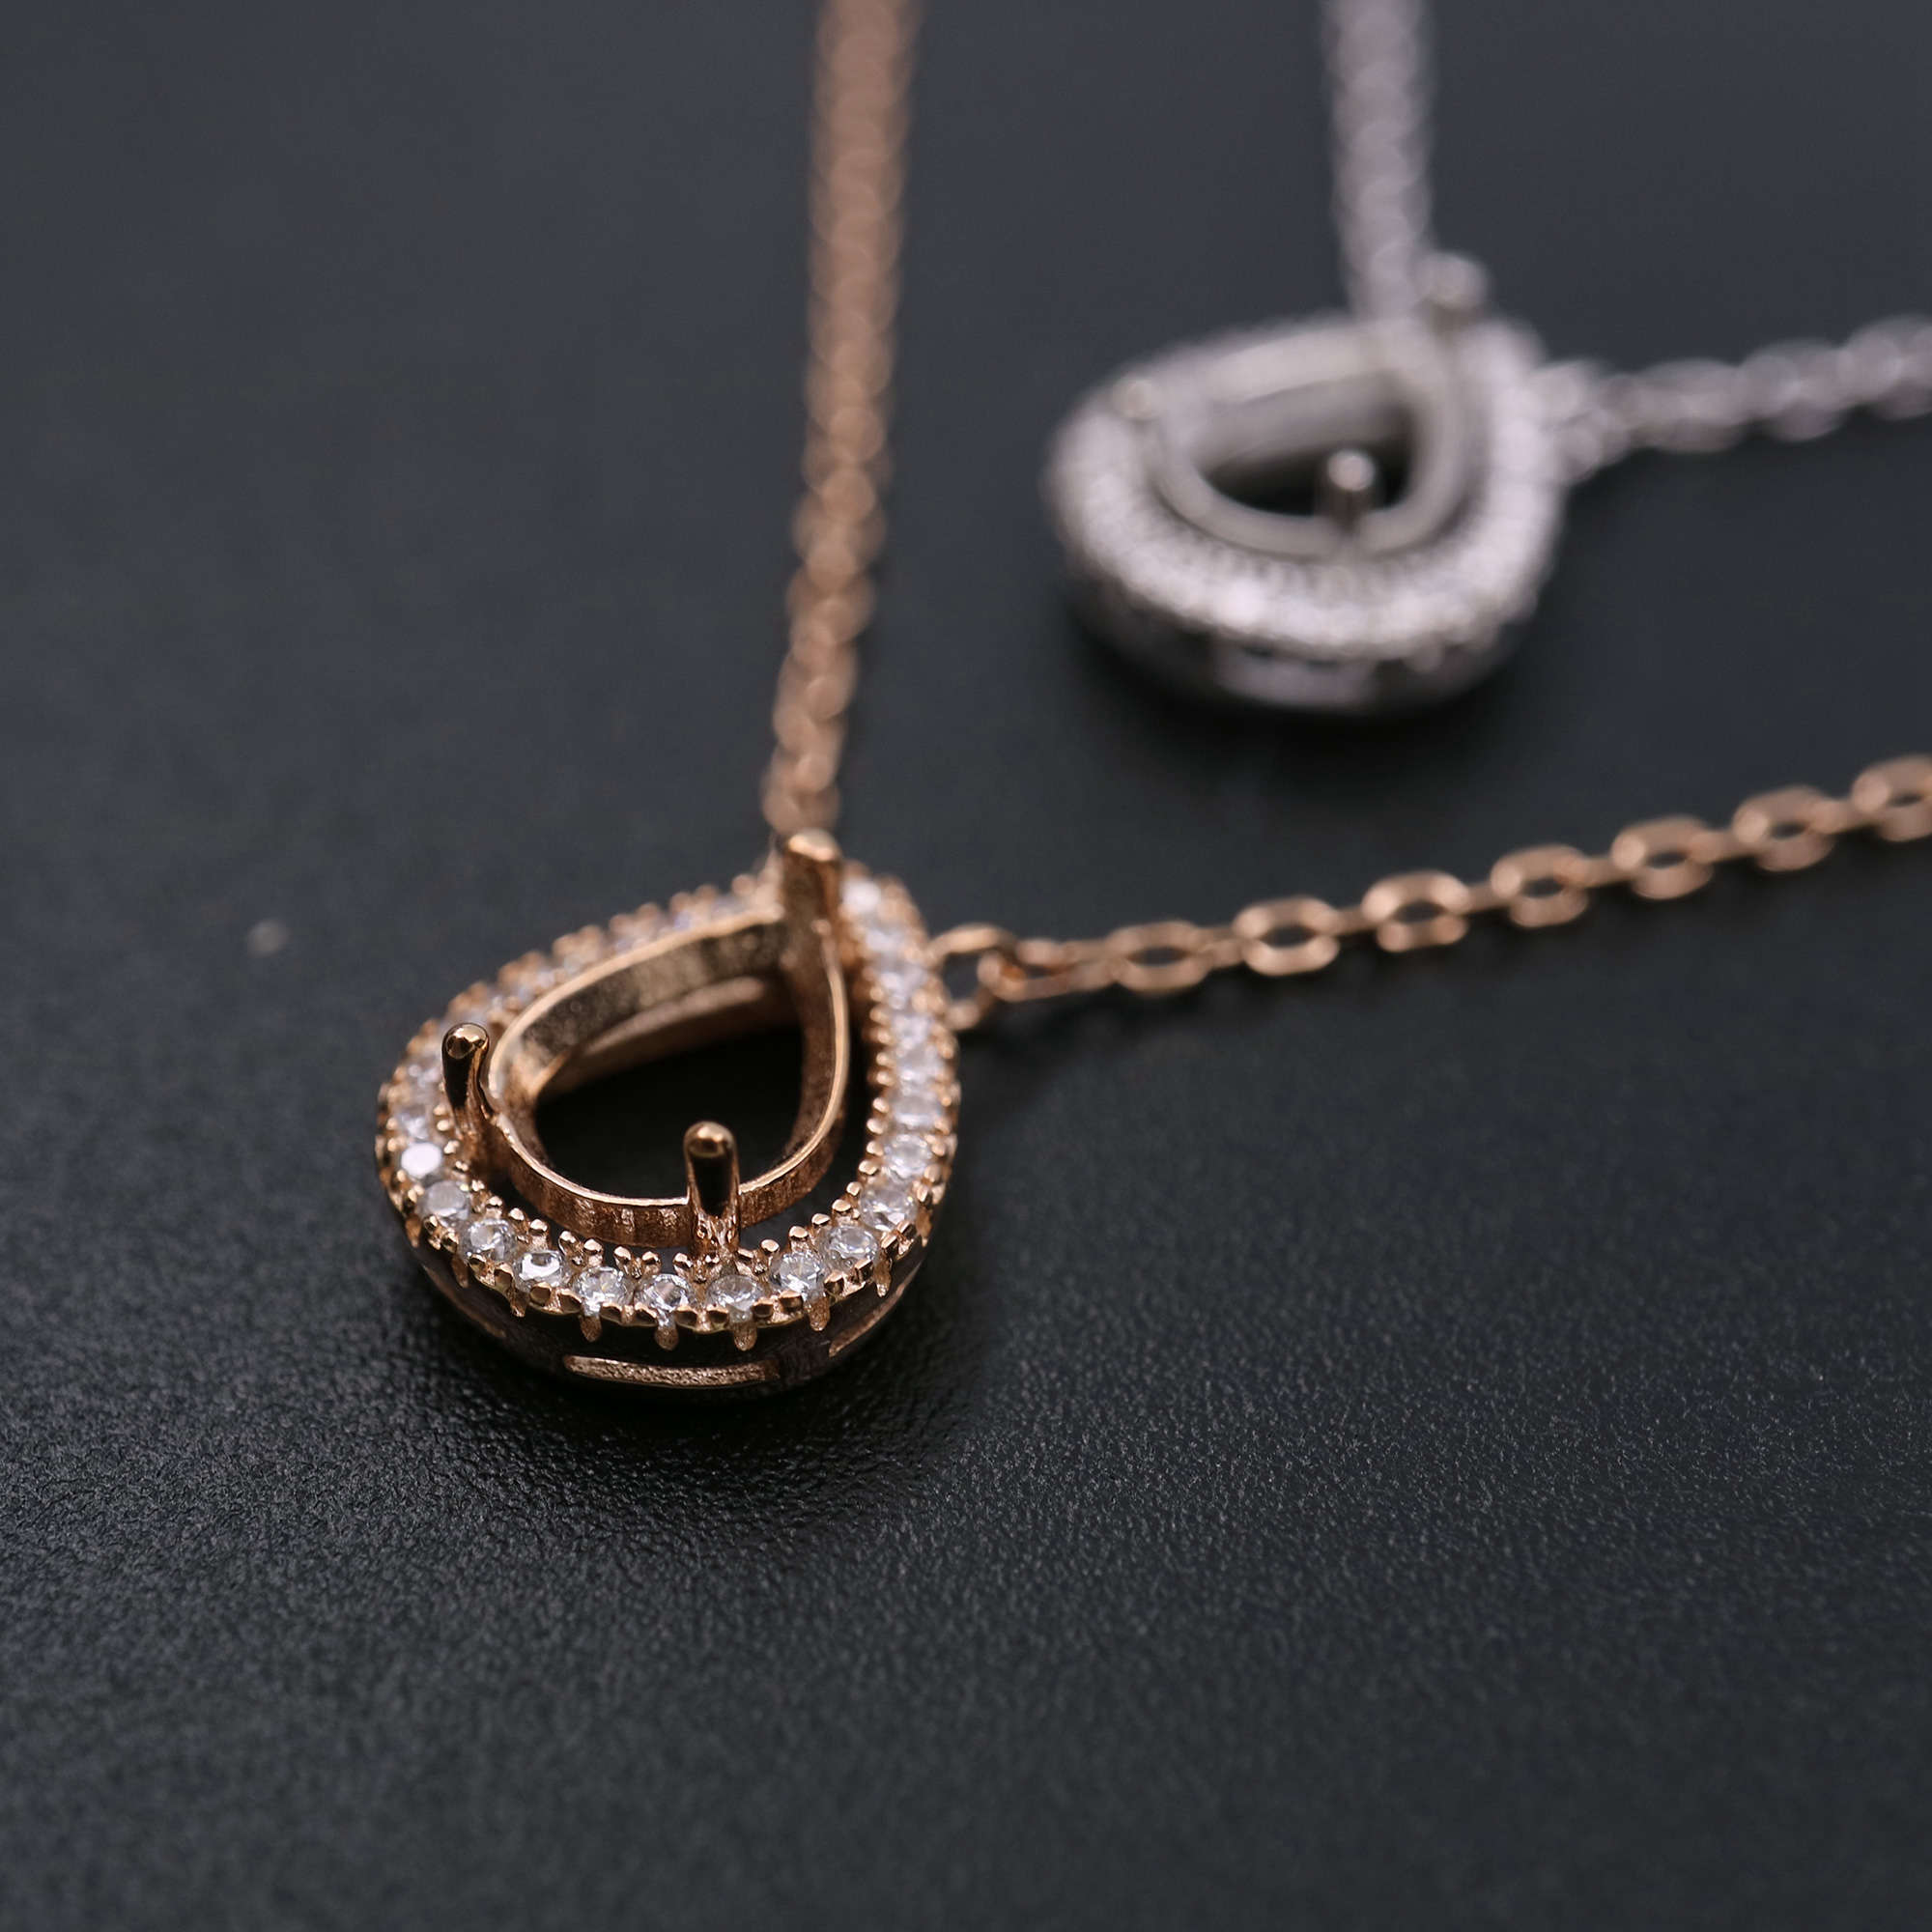 1Pcs 6X8MM Pear Bezel Halo Pave Pendant Settings Rose Gold Plated Solid 925 Sterling Silver Necklace 16Inches +2 Inches Extension DIY Gemstone Supplies 1431046 - Click Image to Close